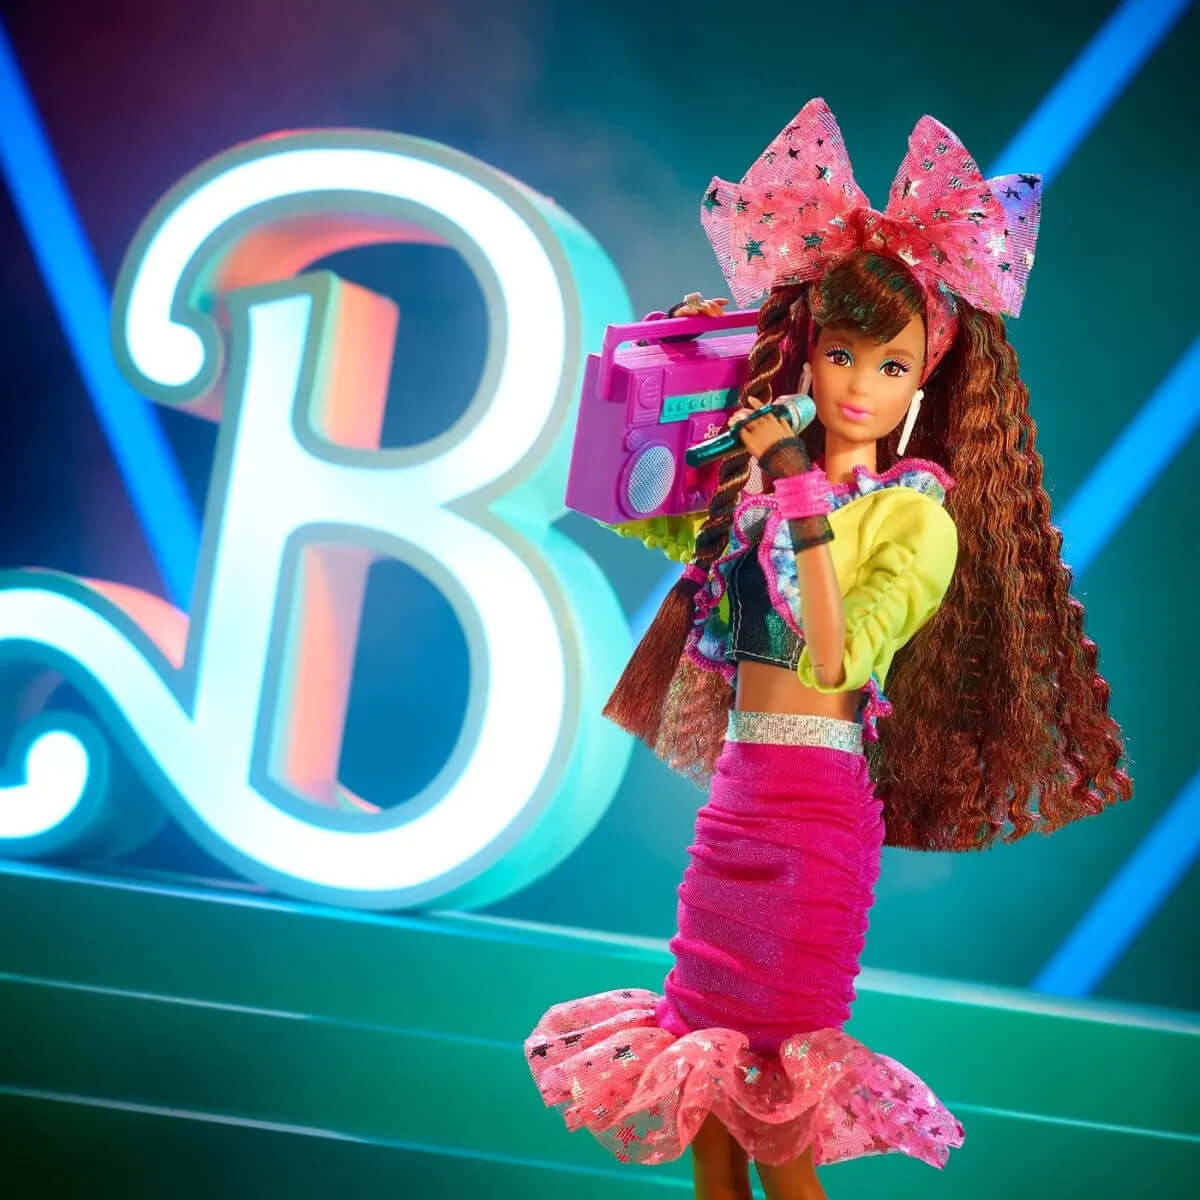 Barbie Rewind 80s Edition Dolls' Night Out Doll-Themed Doll (Brunette) - Simon's Collectibles